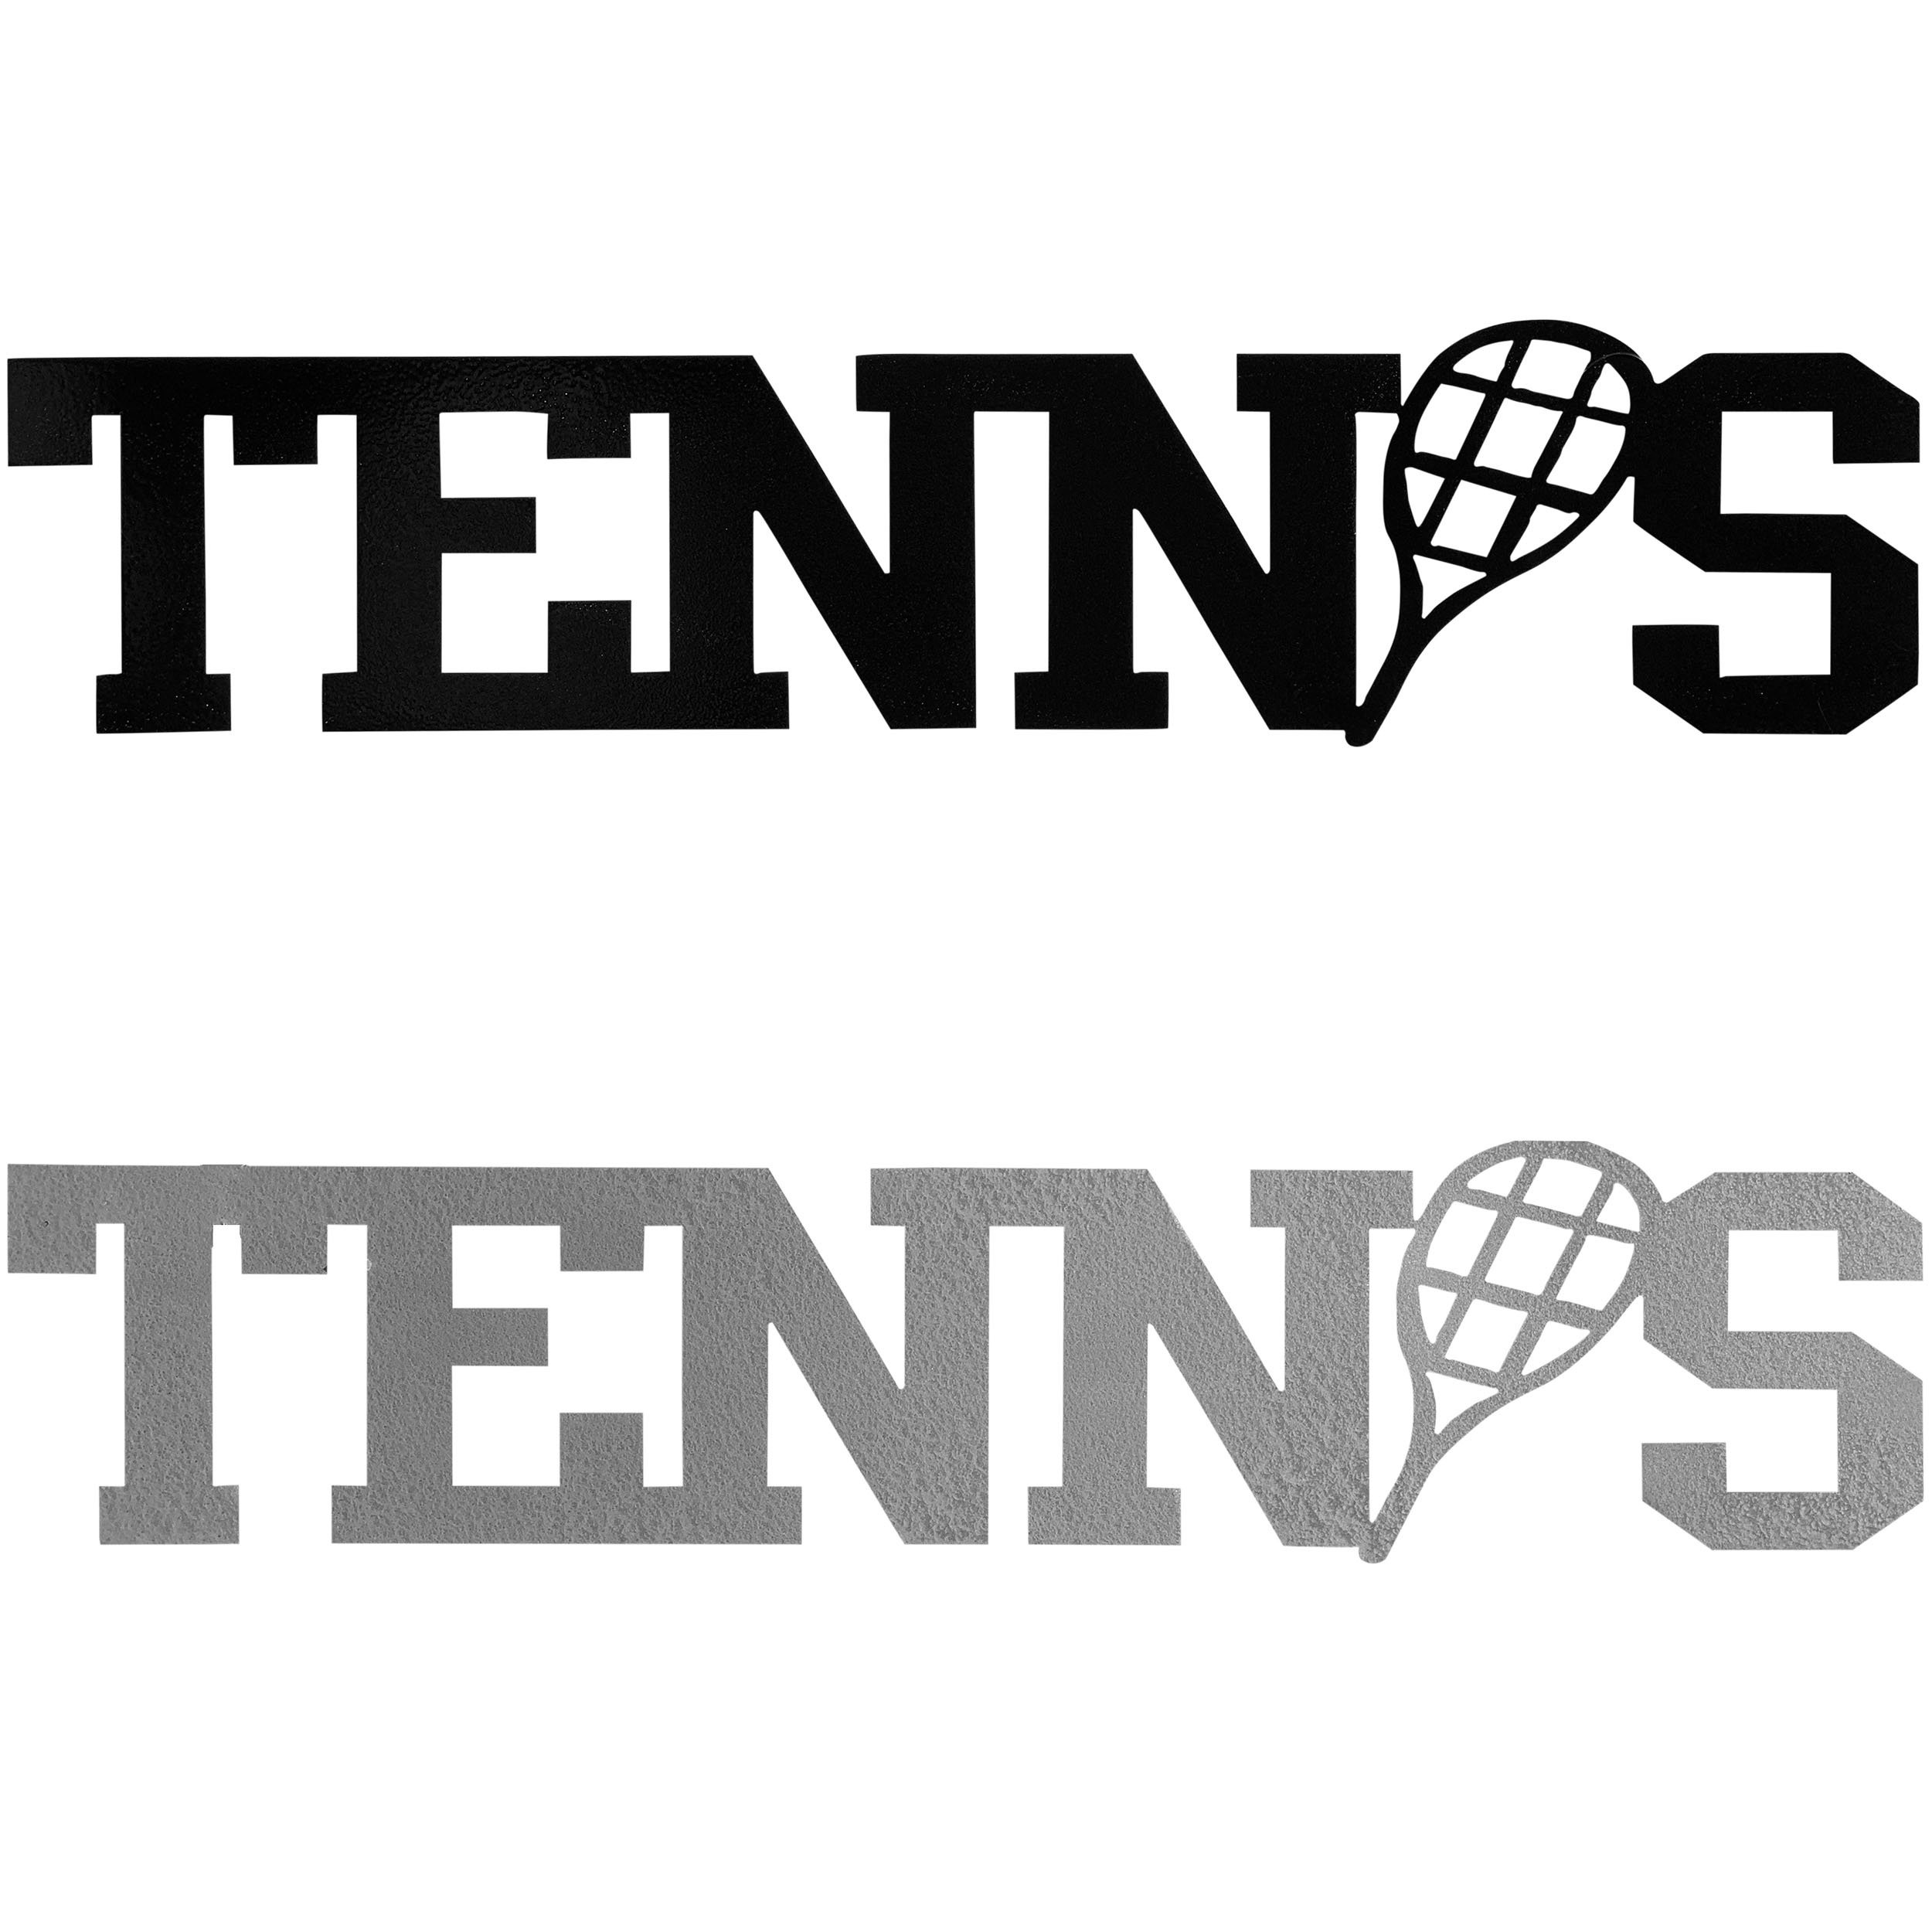 all-tennis-words